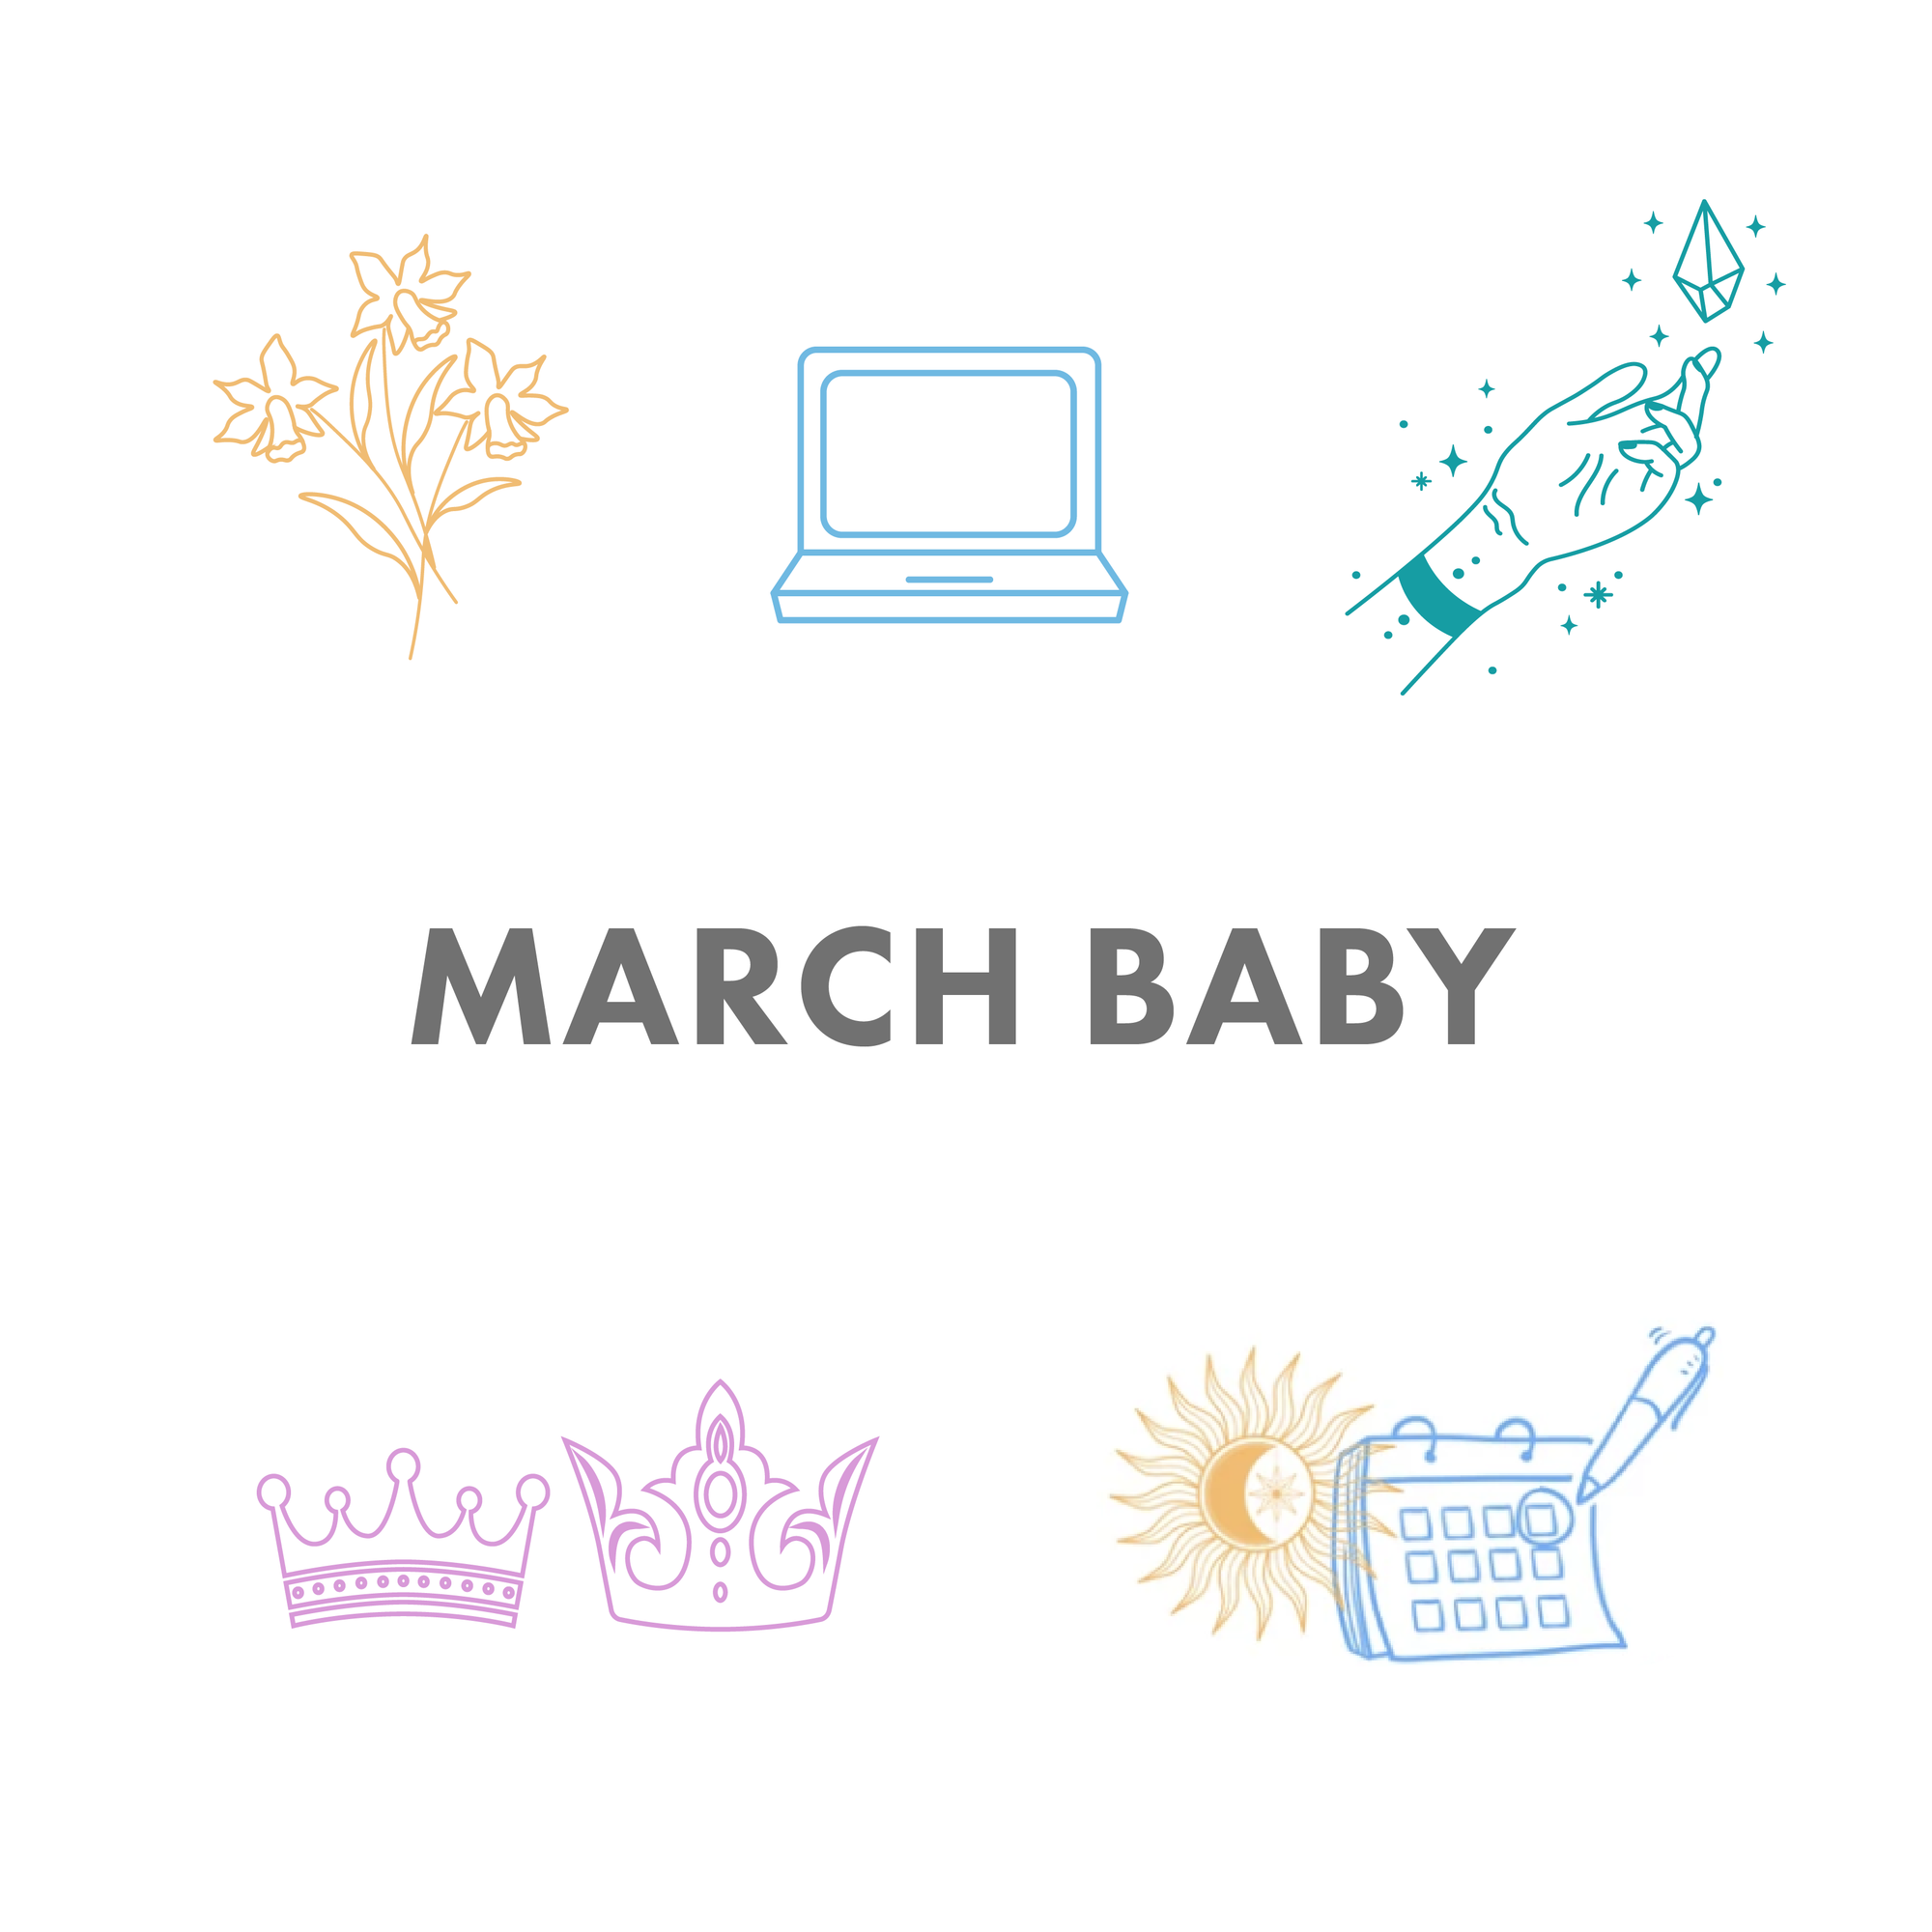 YOUR MARCH BABY